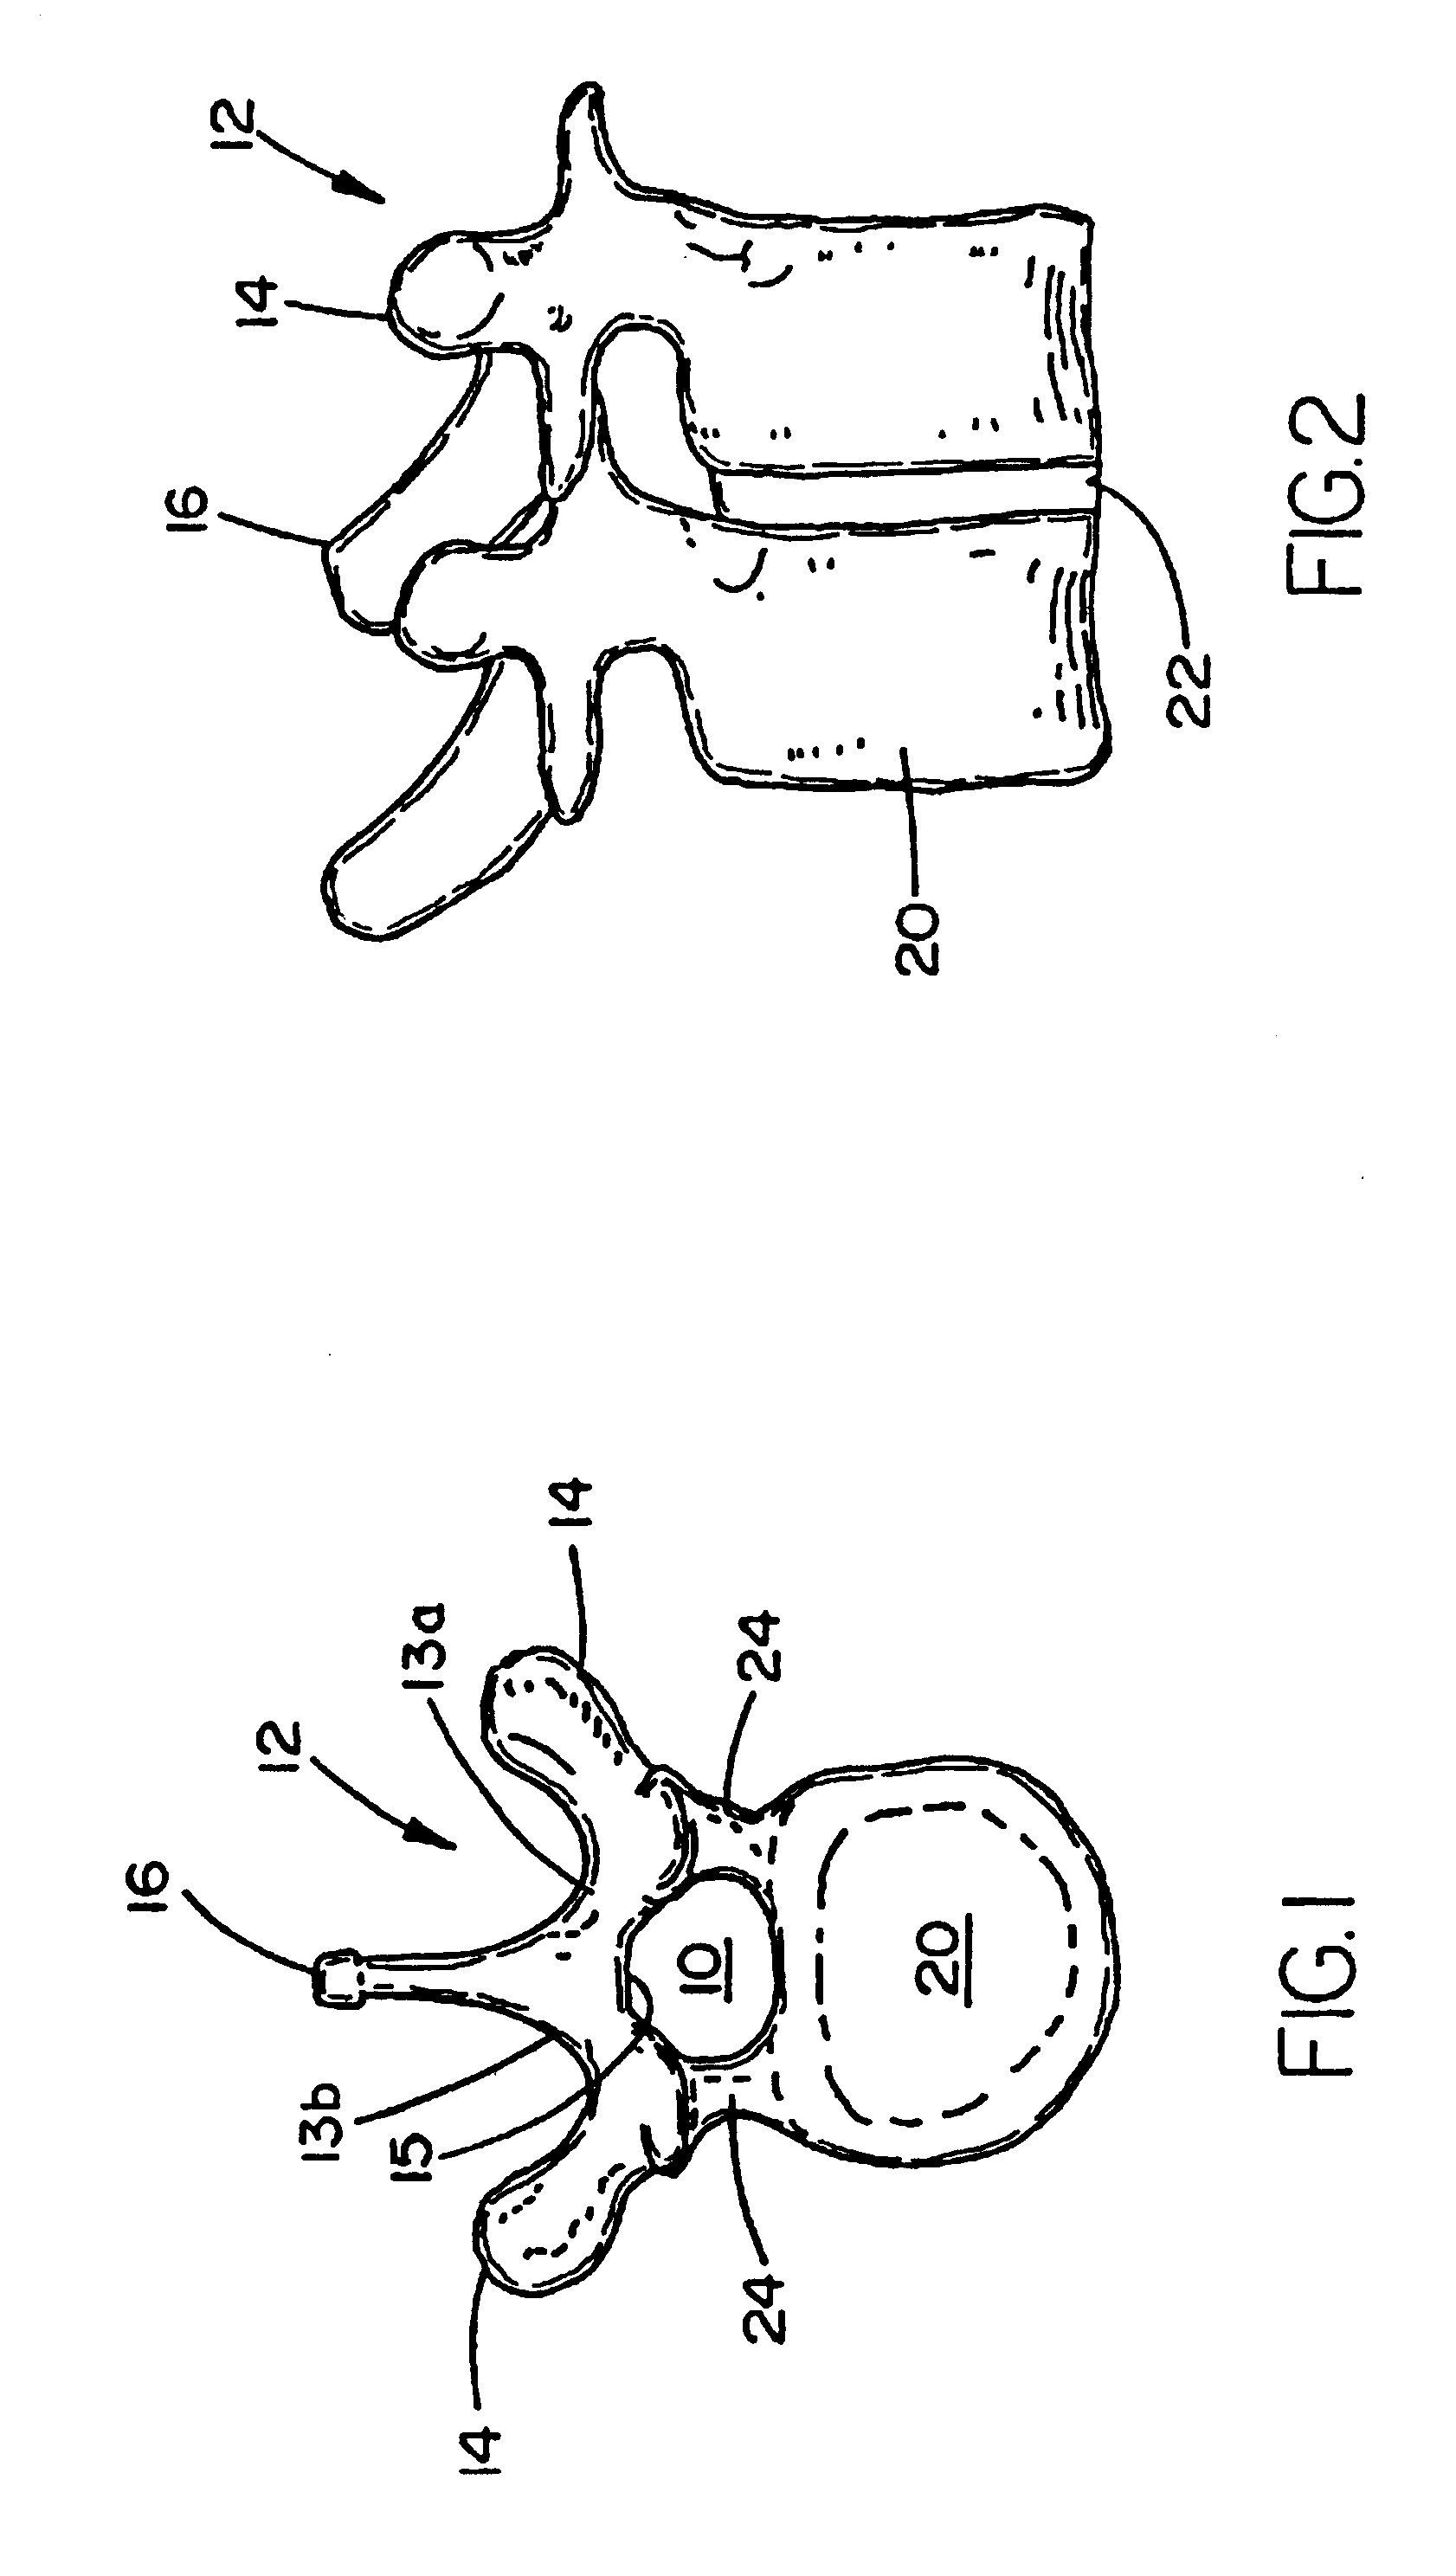 Polyaxial pedicle screw having a threaded and tapered compression locking mechanism